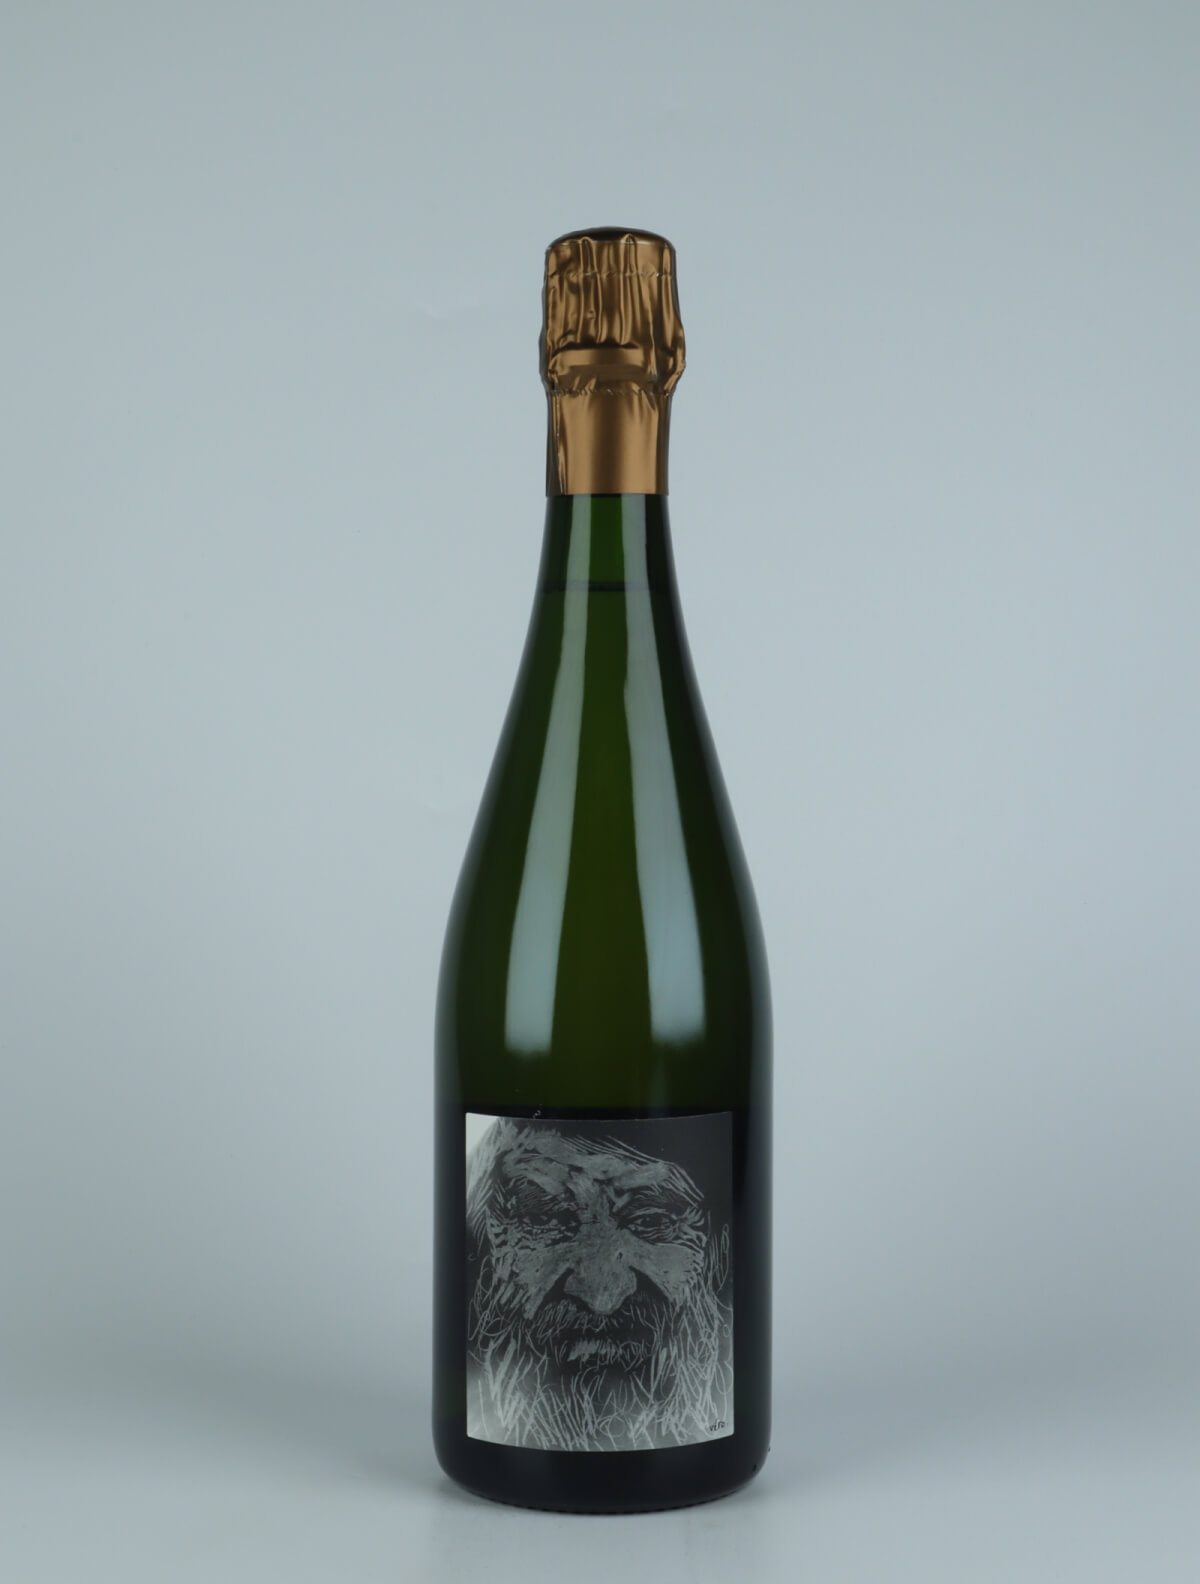 A bottle 2017 Heraclite - Pinot Noir - Brut Nature Sparkling from Stroebel, Champagne in France